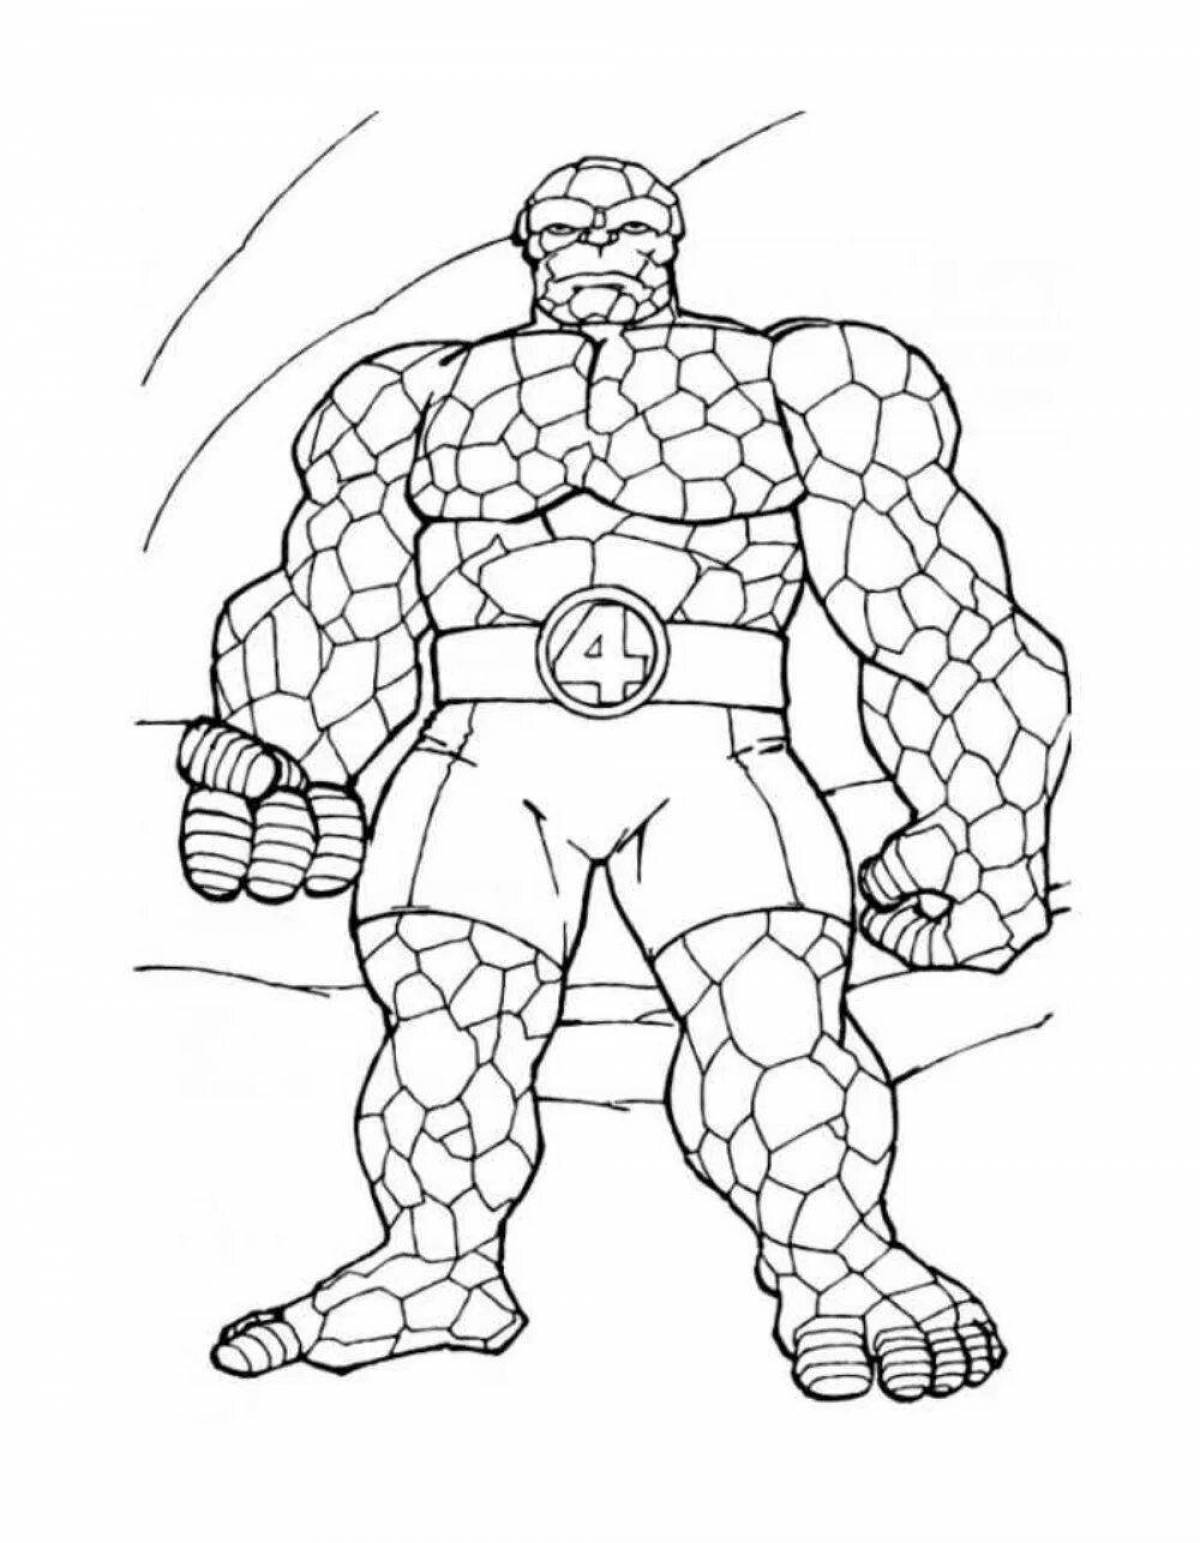 Colorful coloring pages of superheroes for boys 5 years old